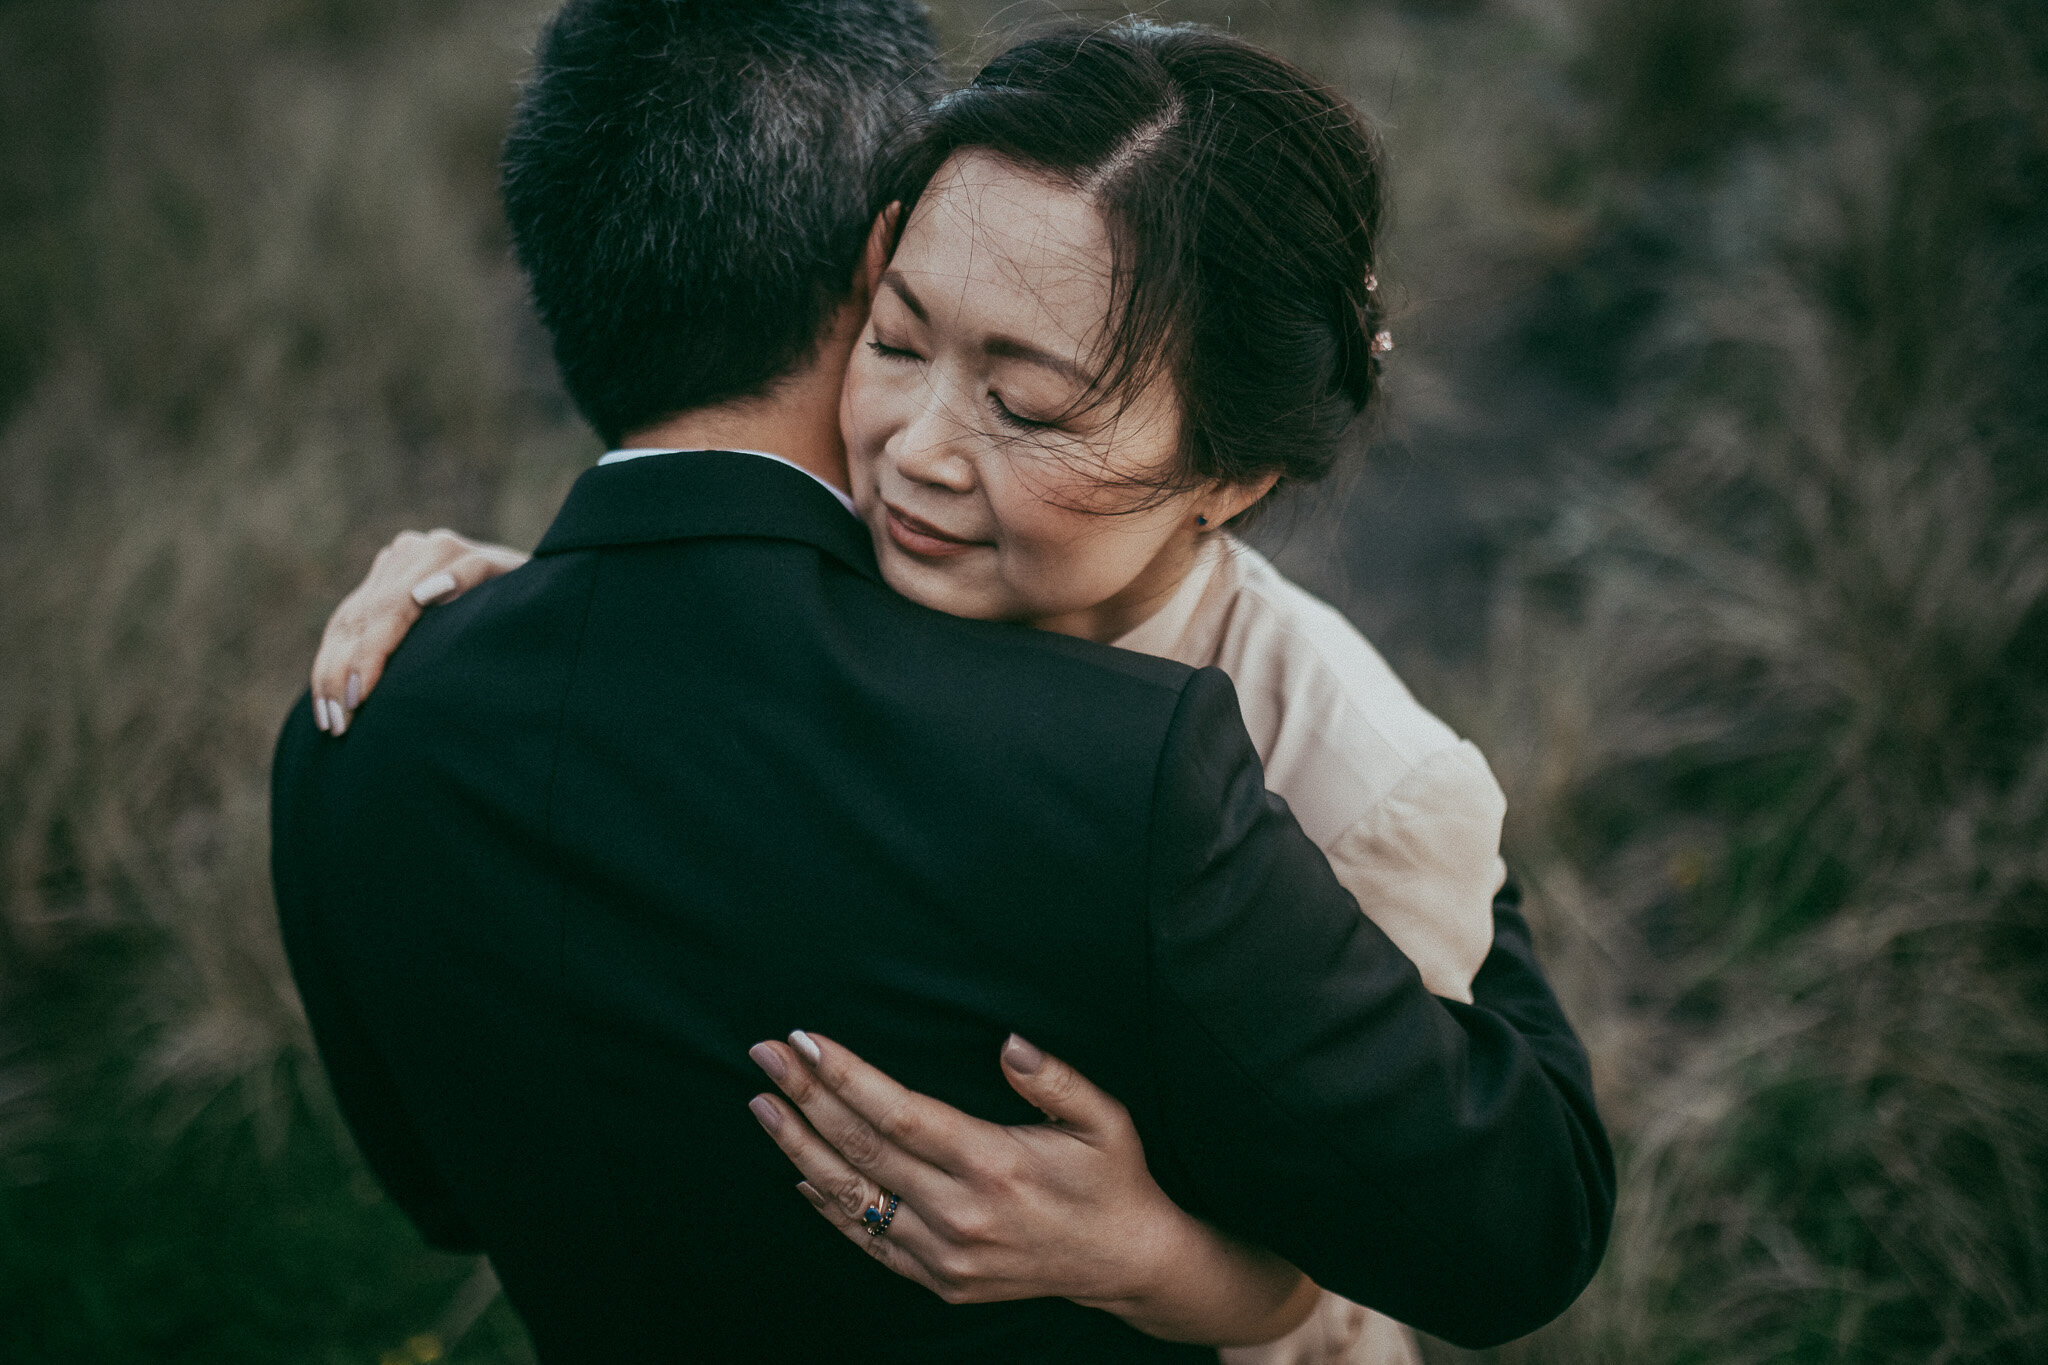 Top moments of the season {Auckland wedding-engagement-family photographers}